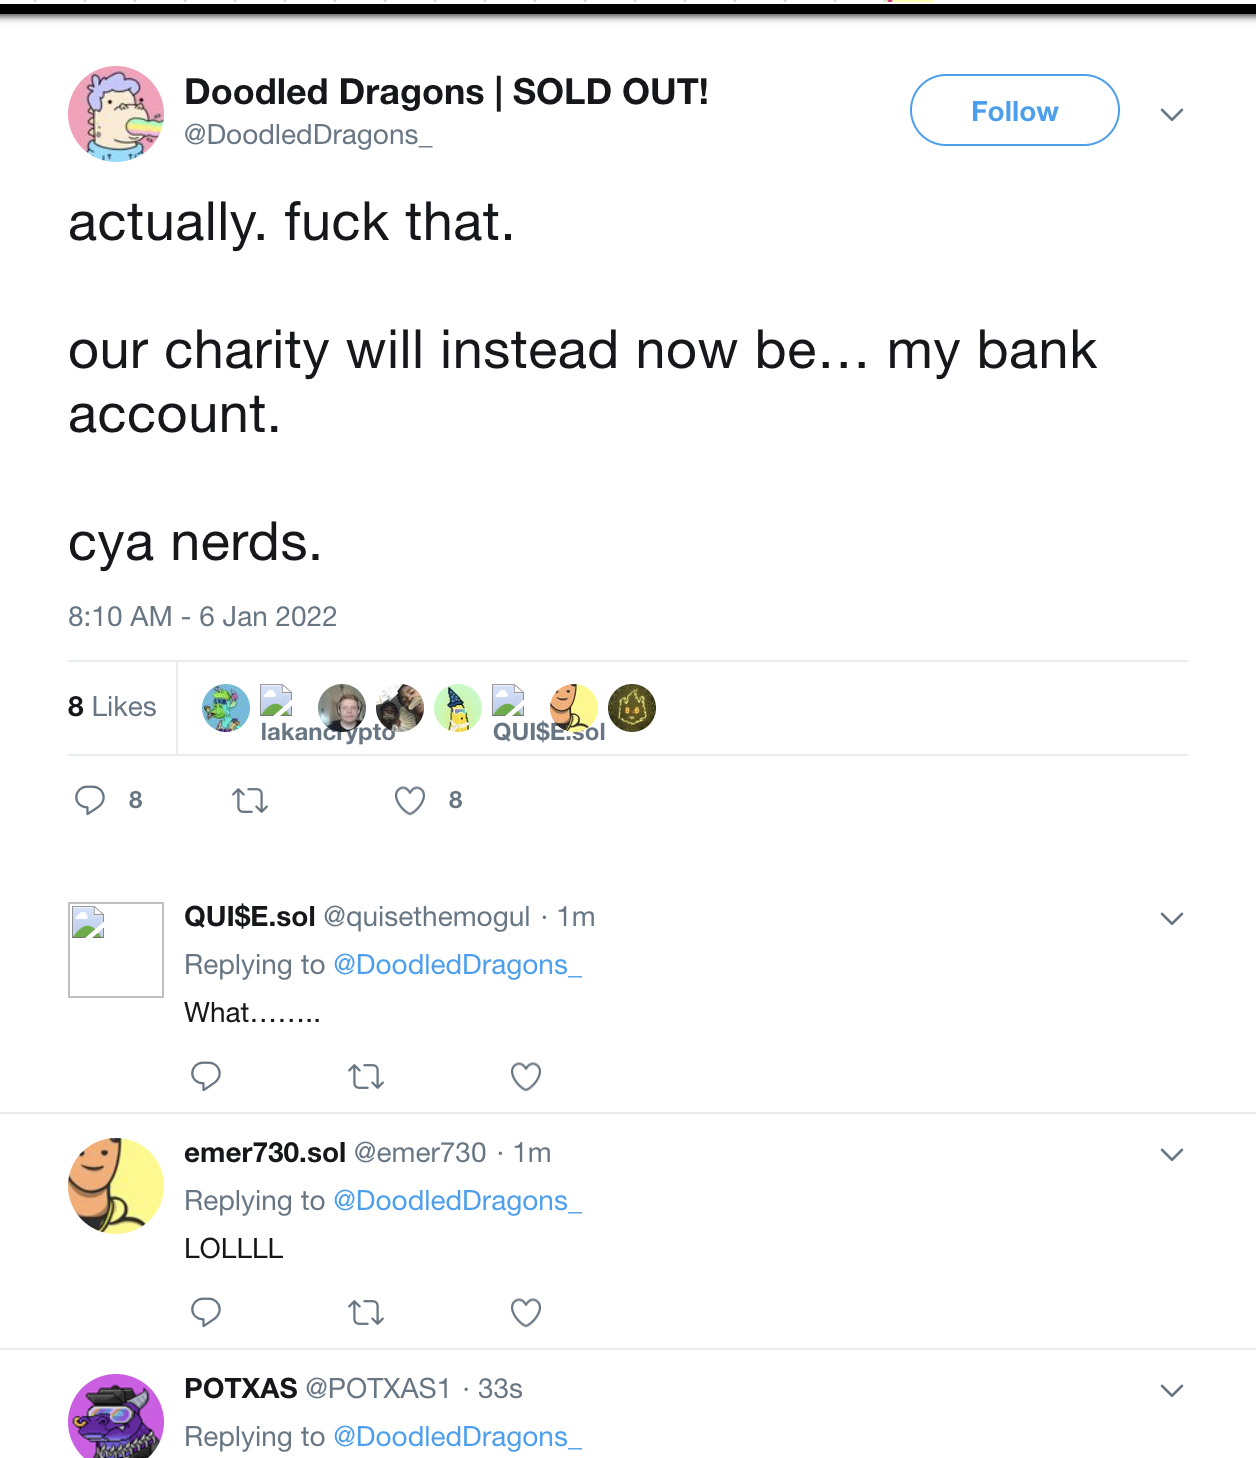 More can be read about this scandal here: https://www.resetera.com/threads/doodled-dragons-a-nft-collection-that-was-supposed-to-donate-all-earnings-to-charity-took-all-the-money-and-ran.537554/